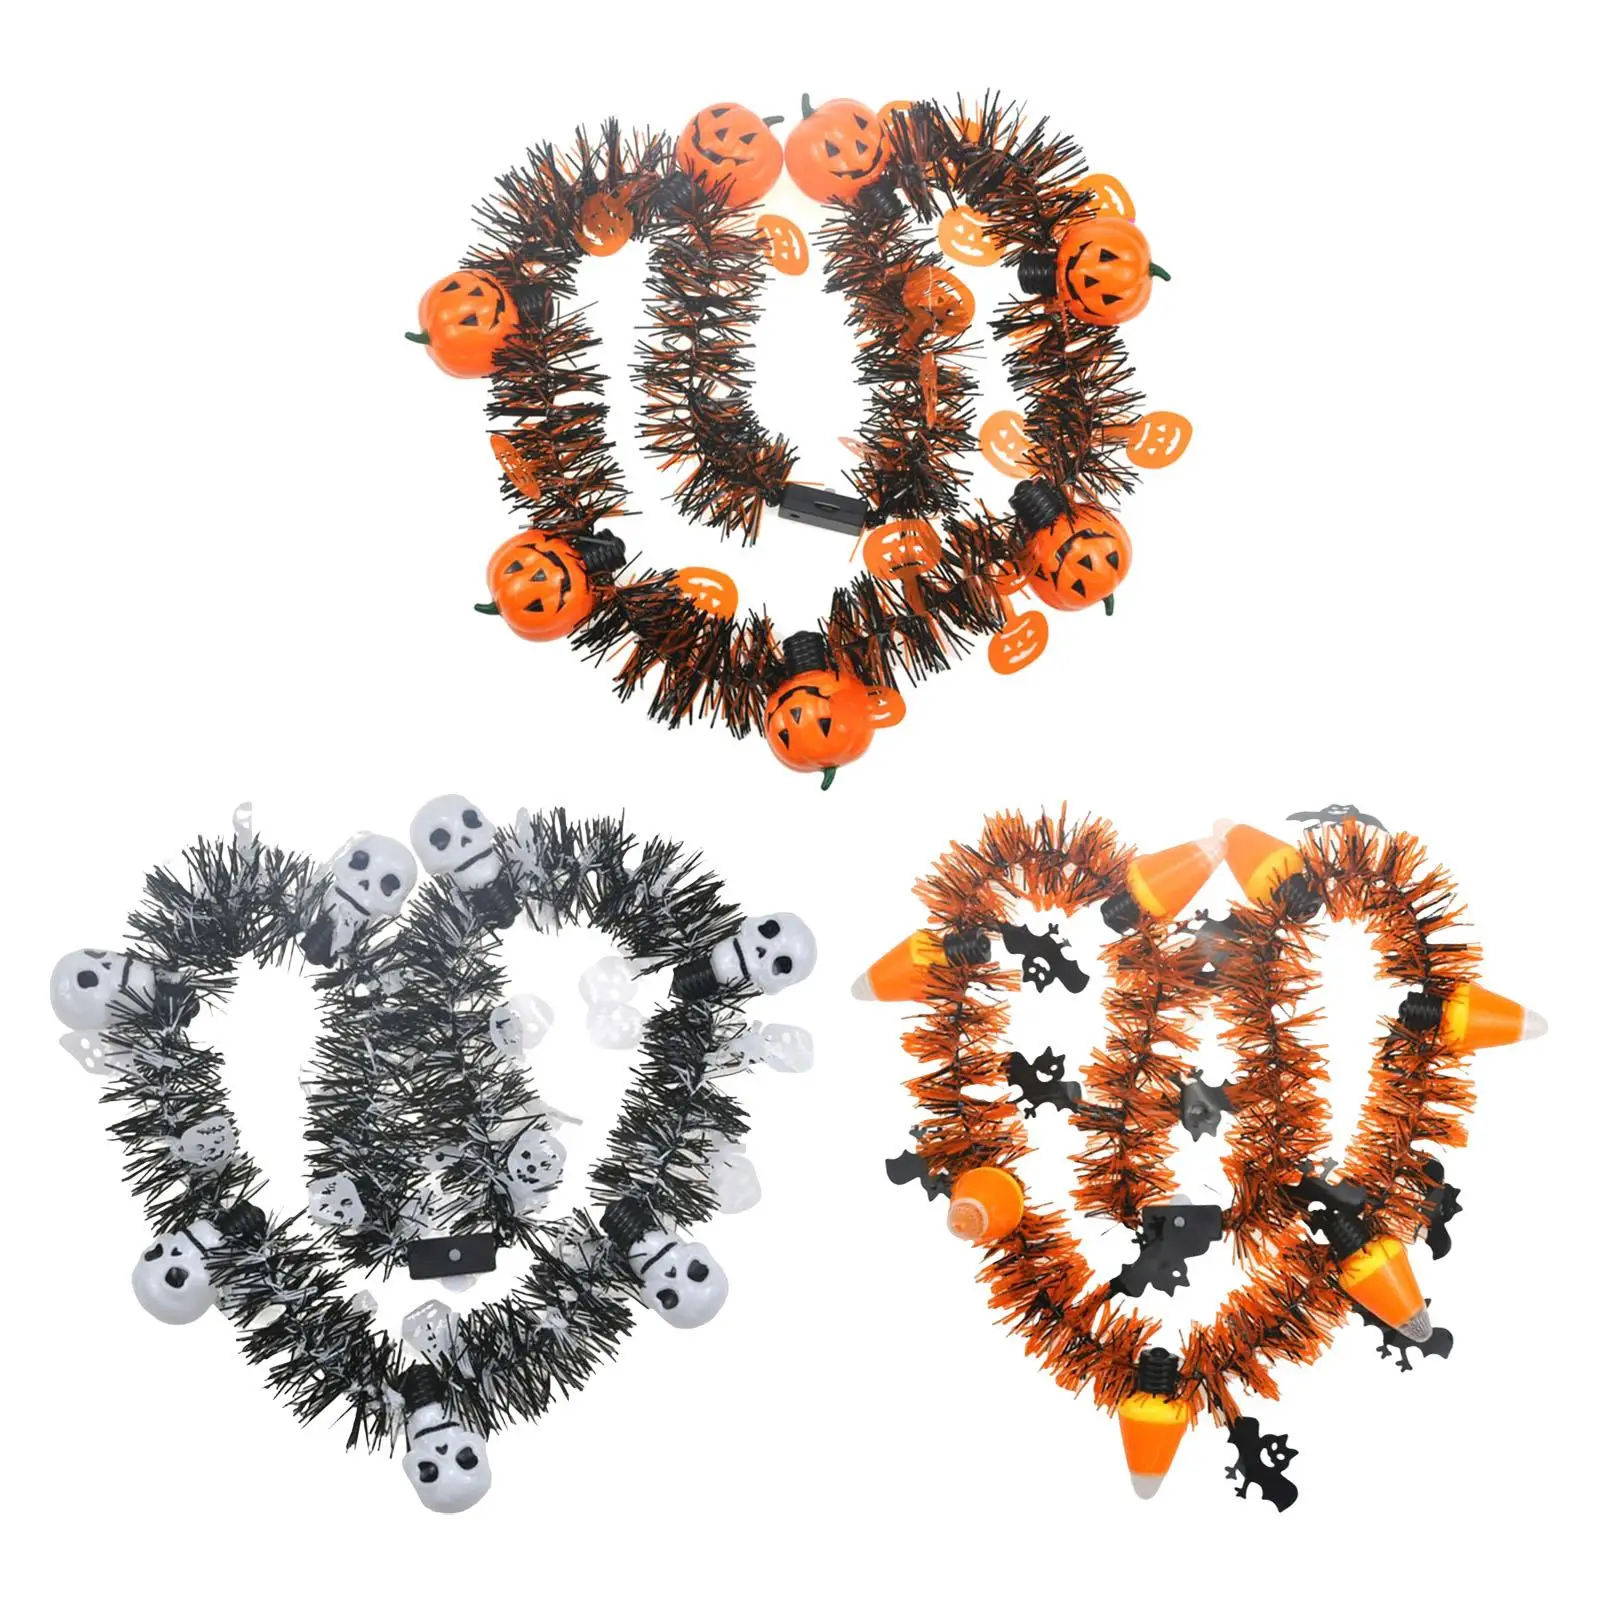 35inch Halloween String Light Battery Operated Wreath Lights Glowing Lanterns Lamp Necklace for Christmas Trees Indoor Garden